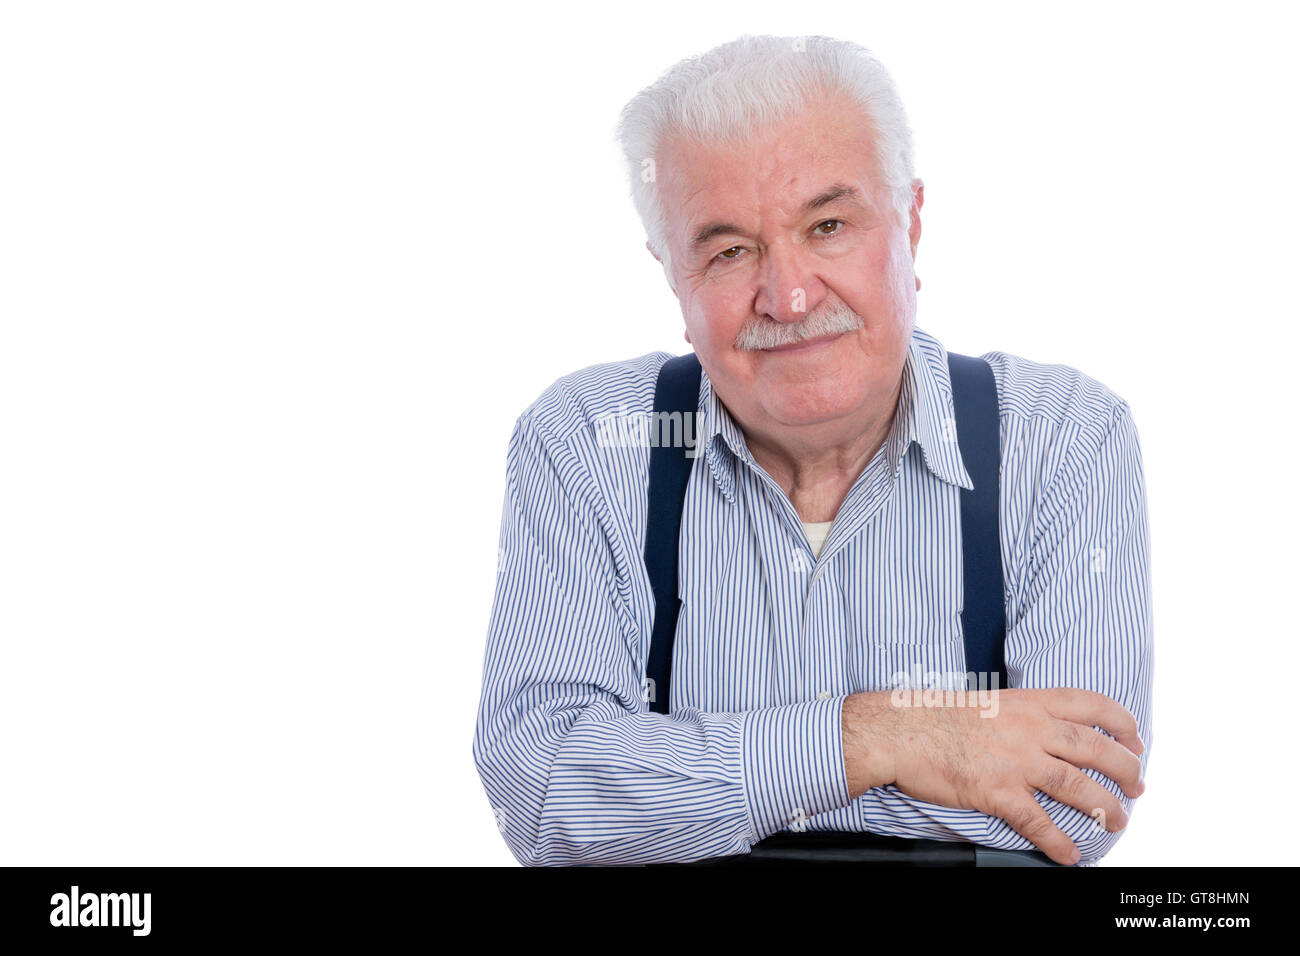 Handsome senior man in white striped shirt and blue suspenders with calm expression and folded arms Stock Photo